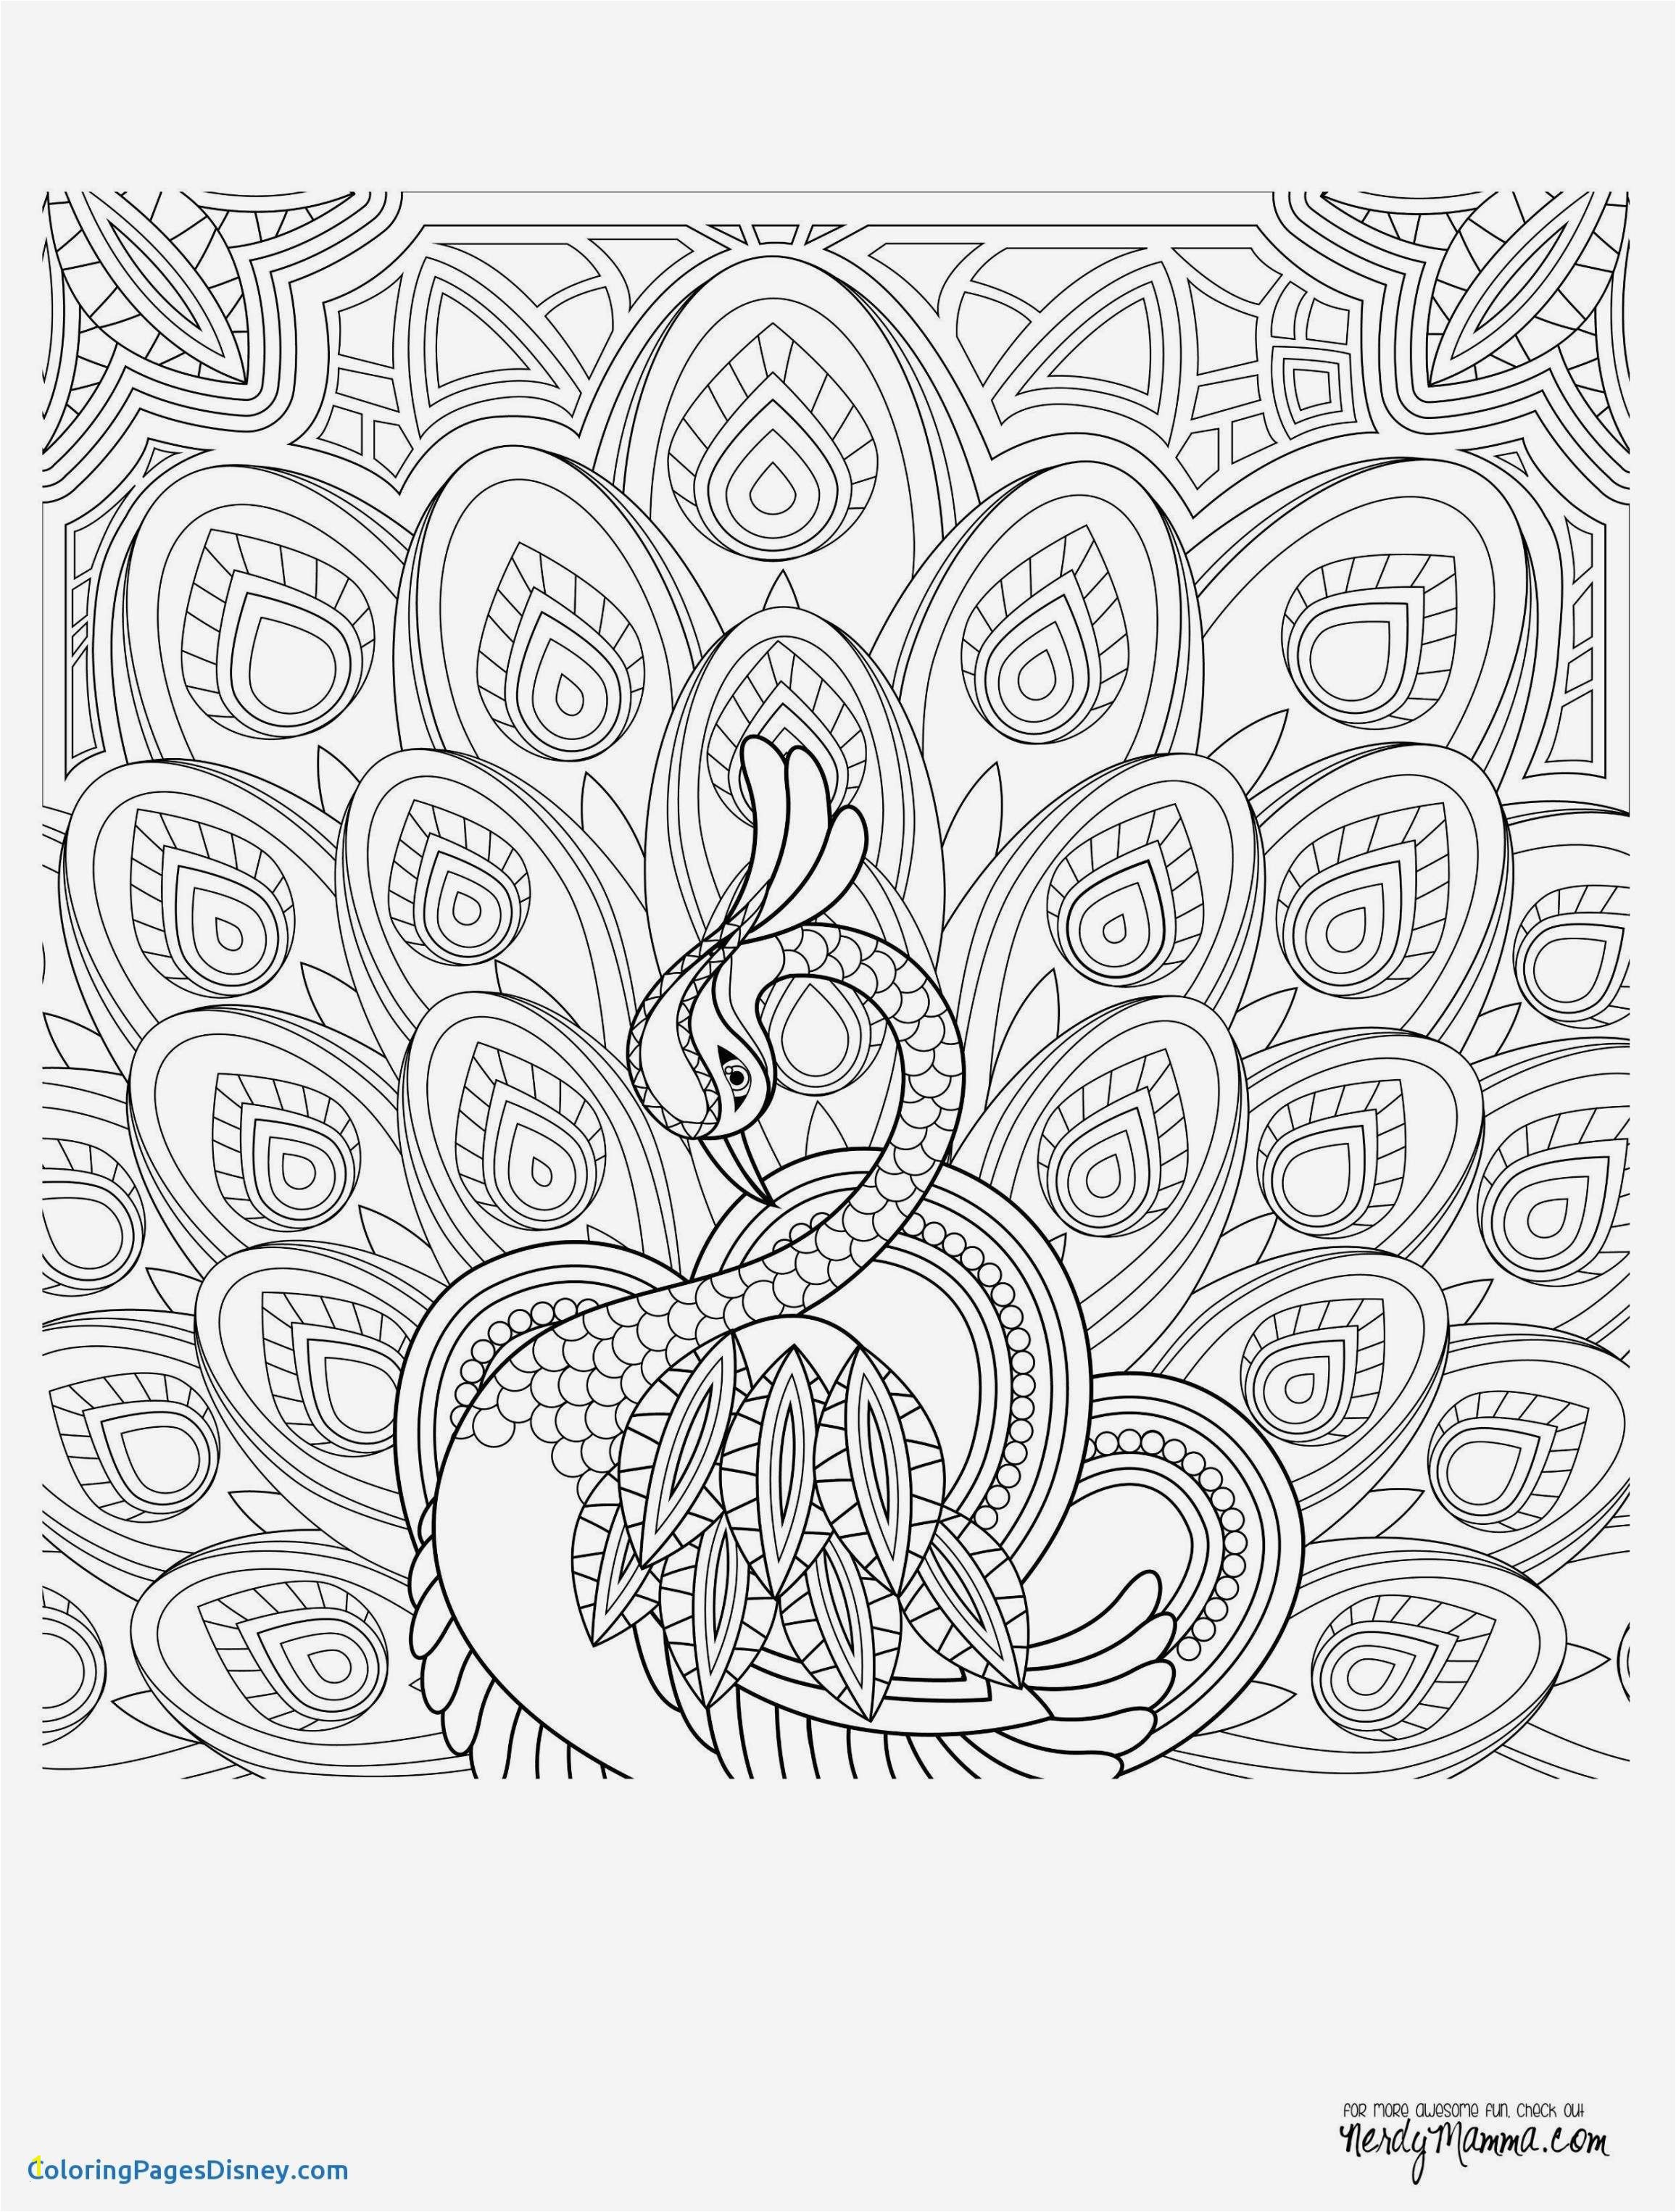 Coloring Pages for Adults Best Fresh S S Media Cache Ak0 Pinimg originals 0d B4 2c